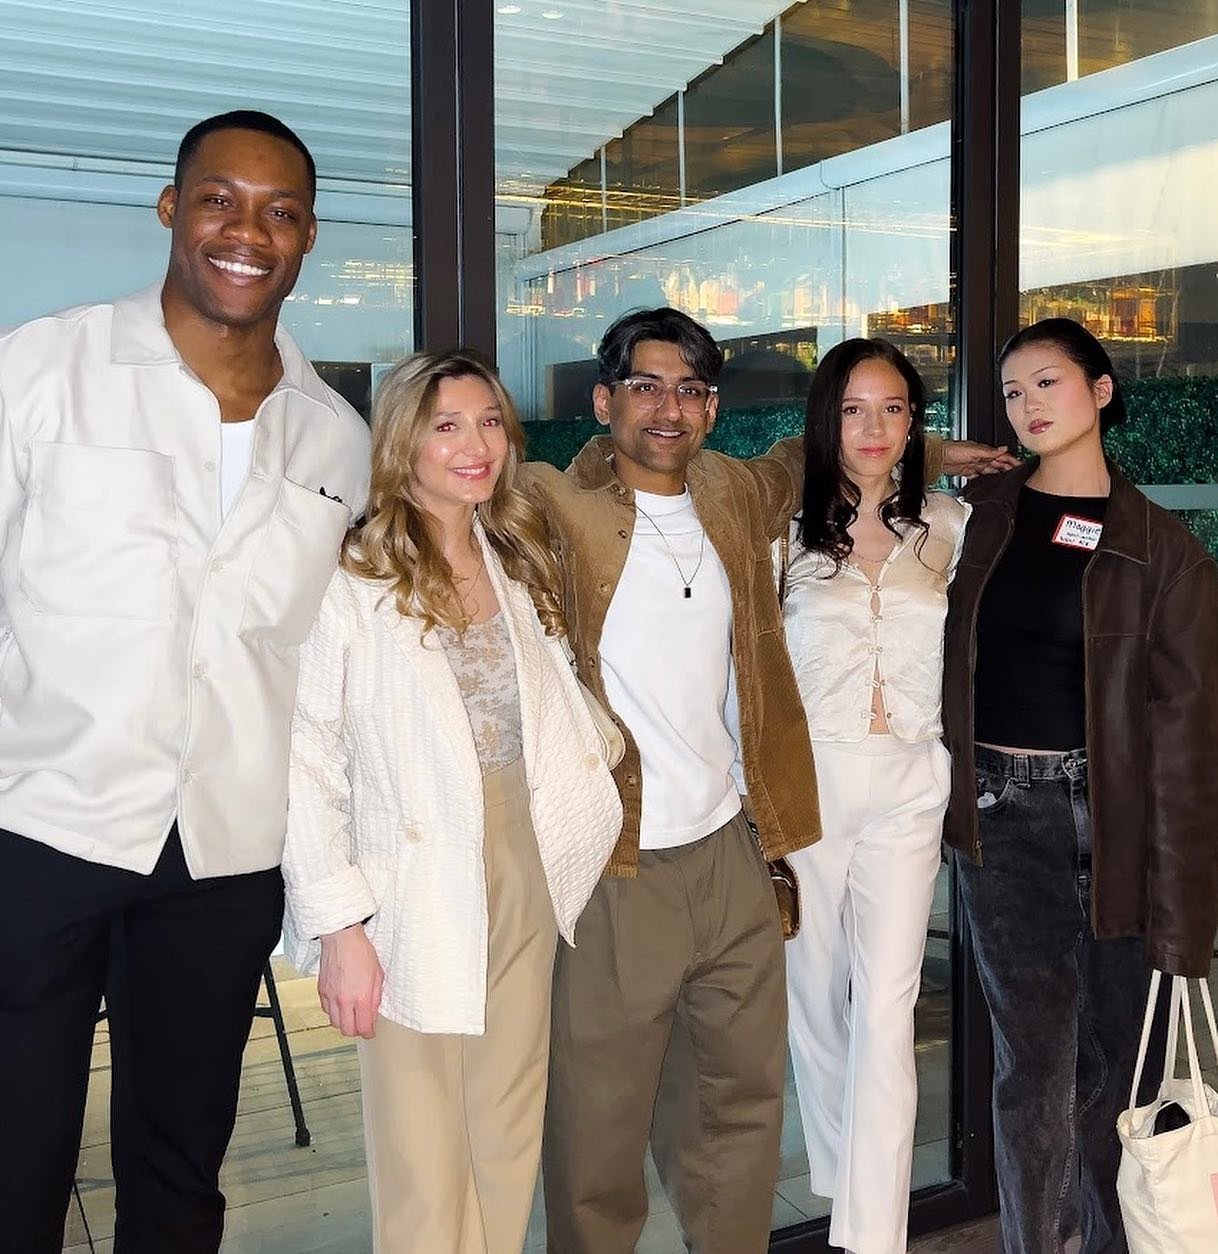 We had an amazing time at last week&rsquo;s Toronto mixer (hosted in partnership with Rev Gen Inc. and Aligned)!

We love seeing Women in Sales members connect in person and hearing stories of new friendships formed through these events!

Saad Khan a